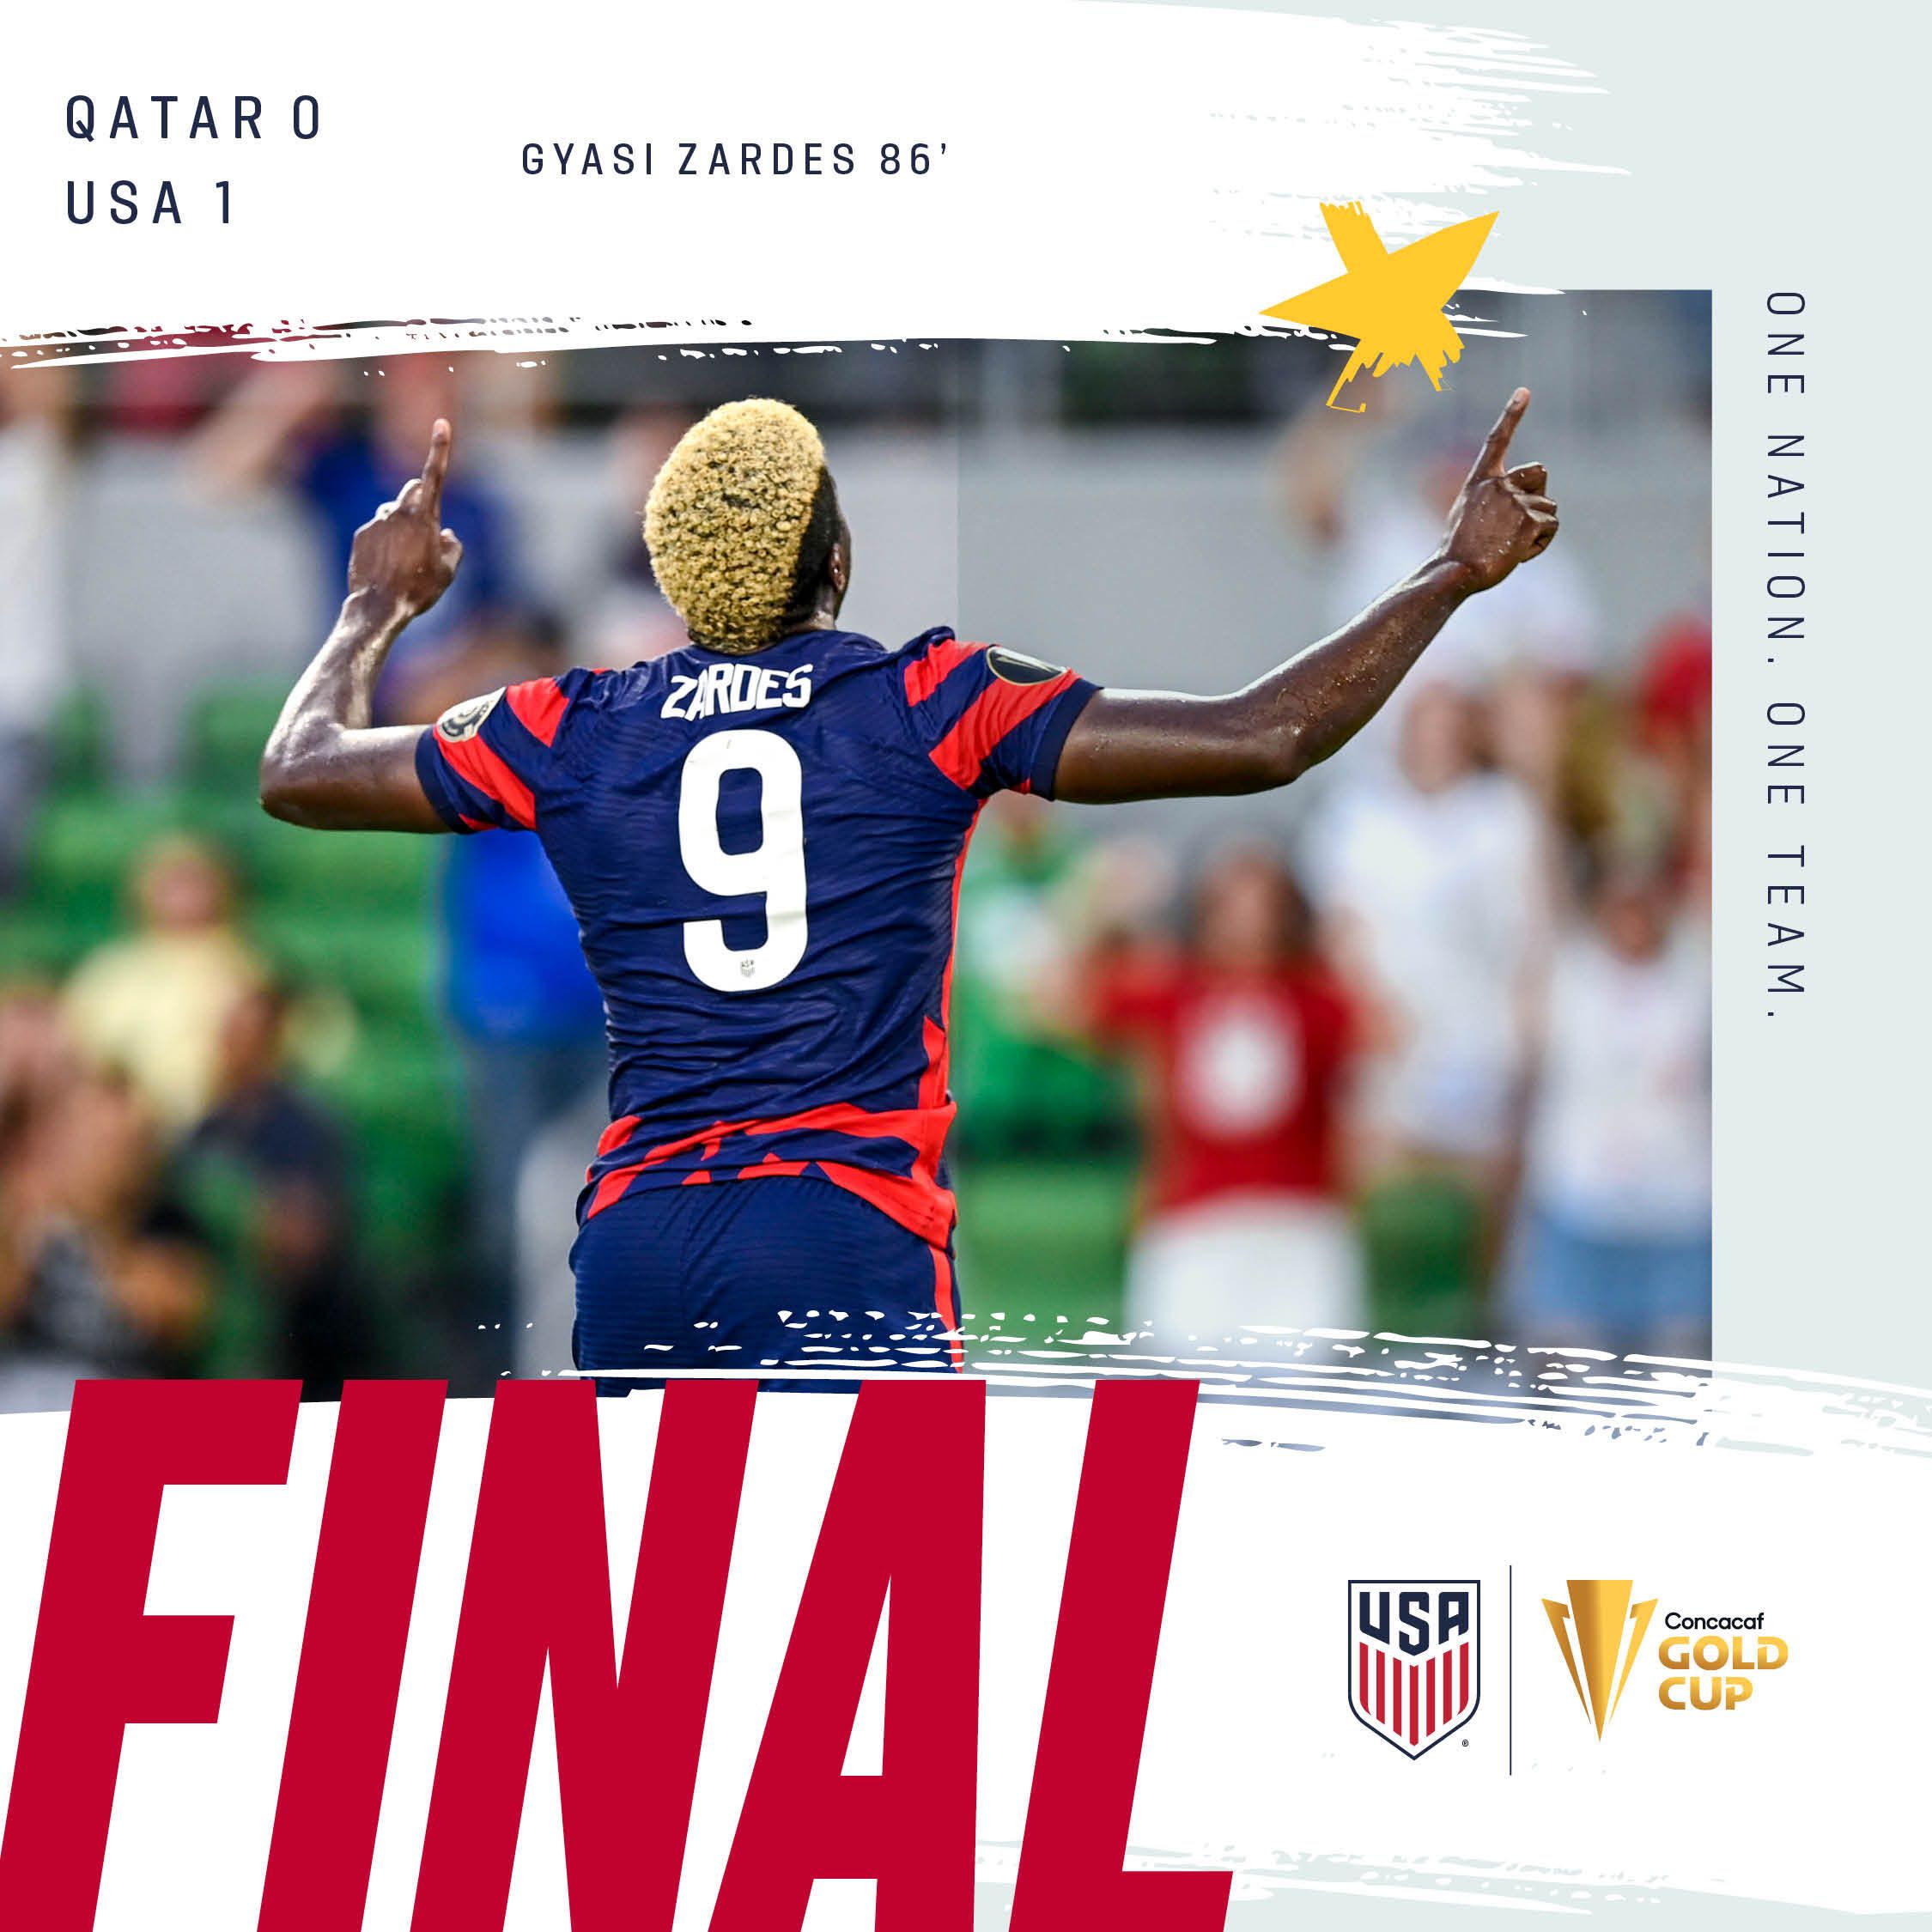 Late Goal From Gyasi Zardes Sends USA to Concacaf Gold Cup Final With 1-0 Win Against Qatar